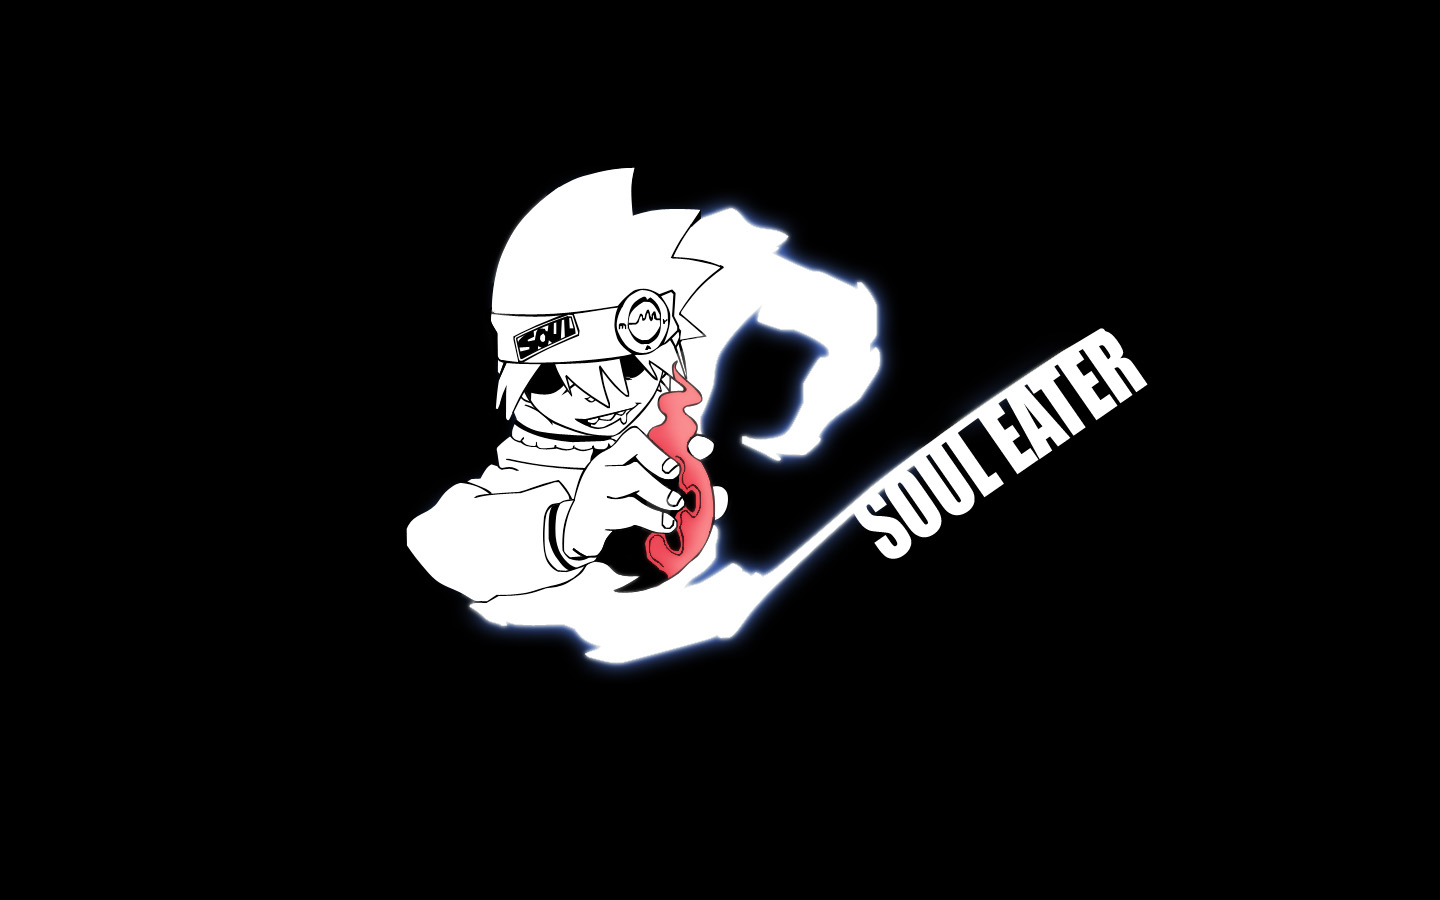 Soul Eater HD Image Wallpaper Attachment Amazing Wallpaperz